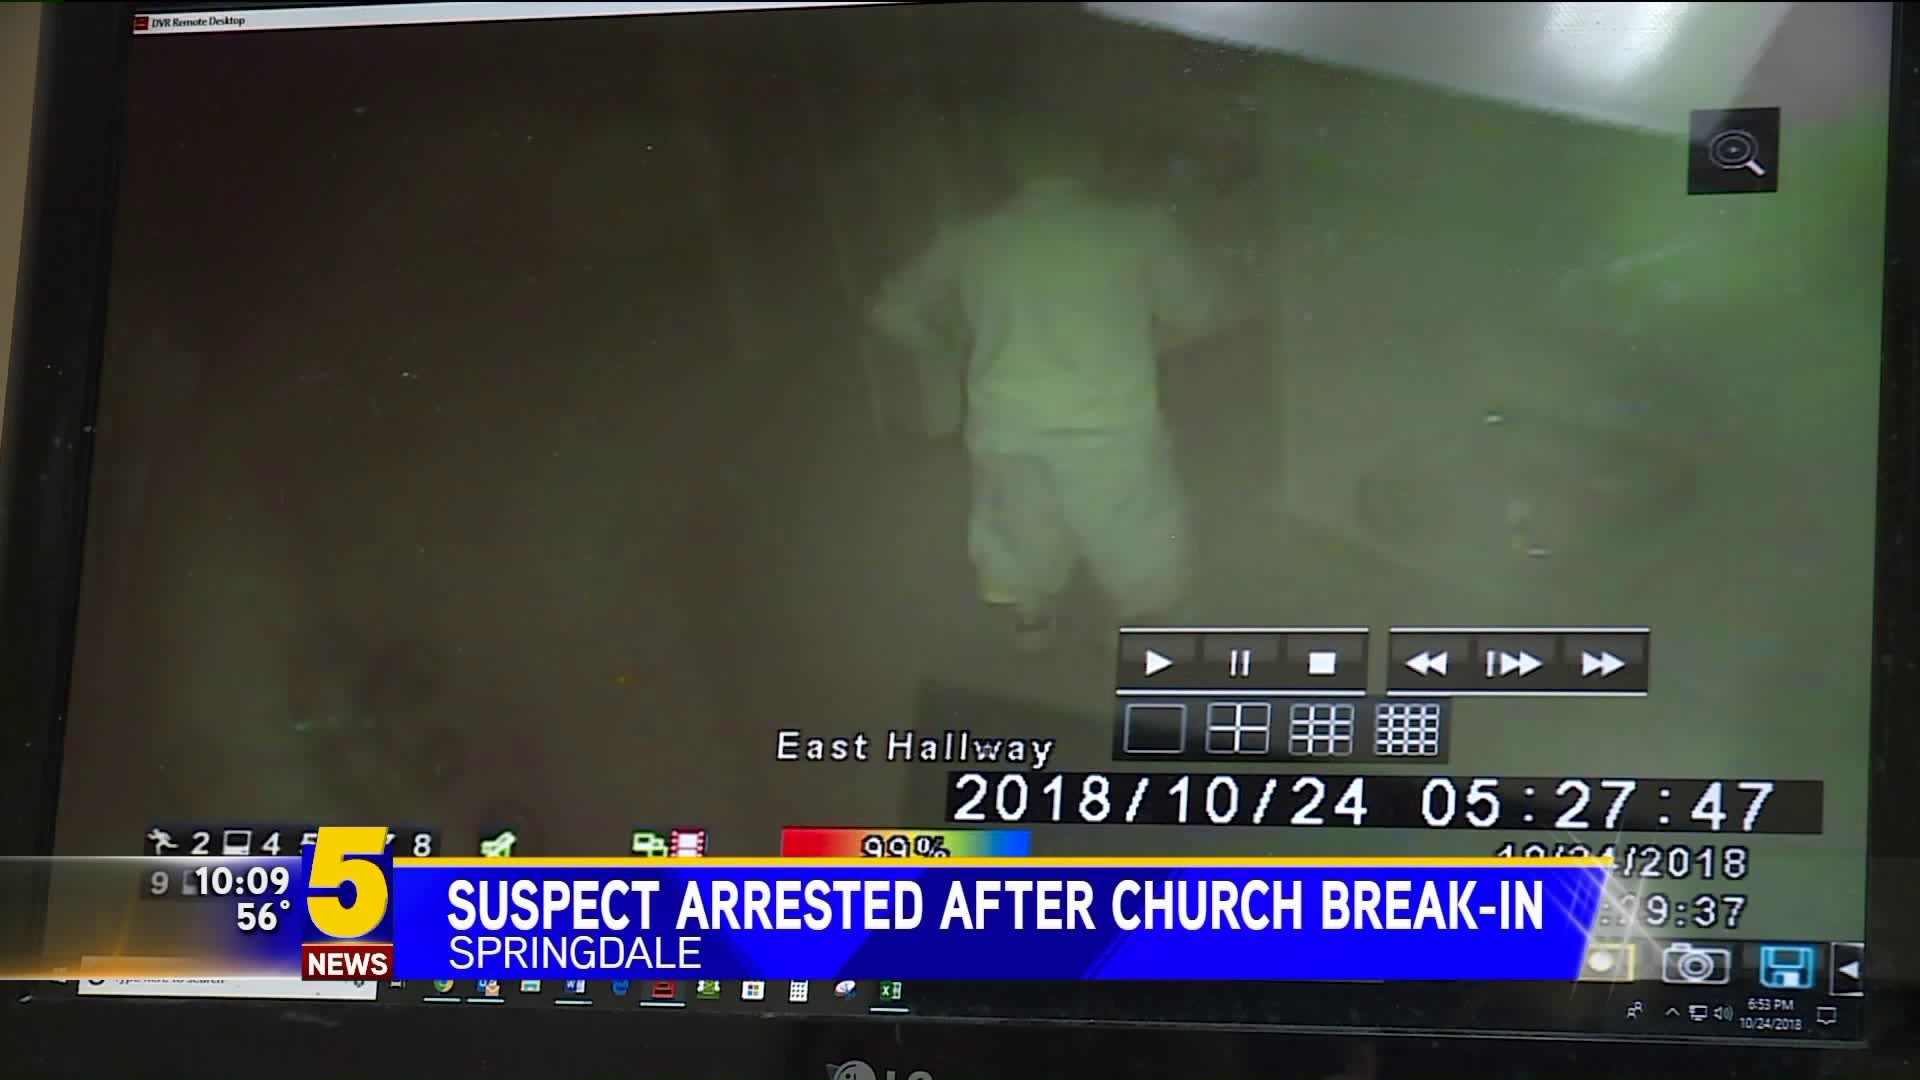 Suspect Arrested After Church Break-In